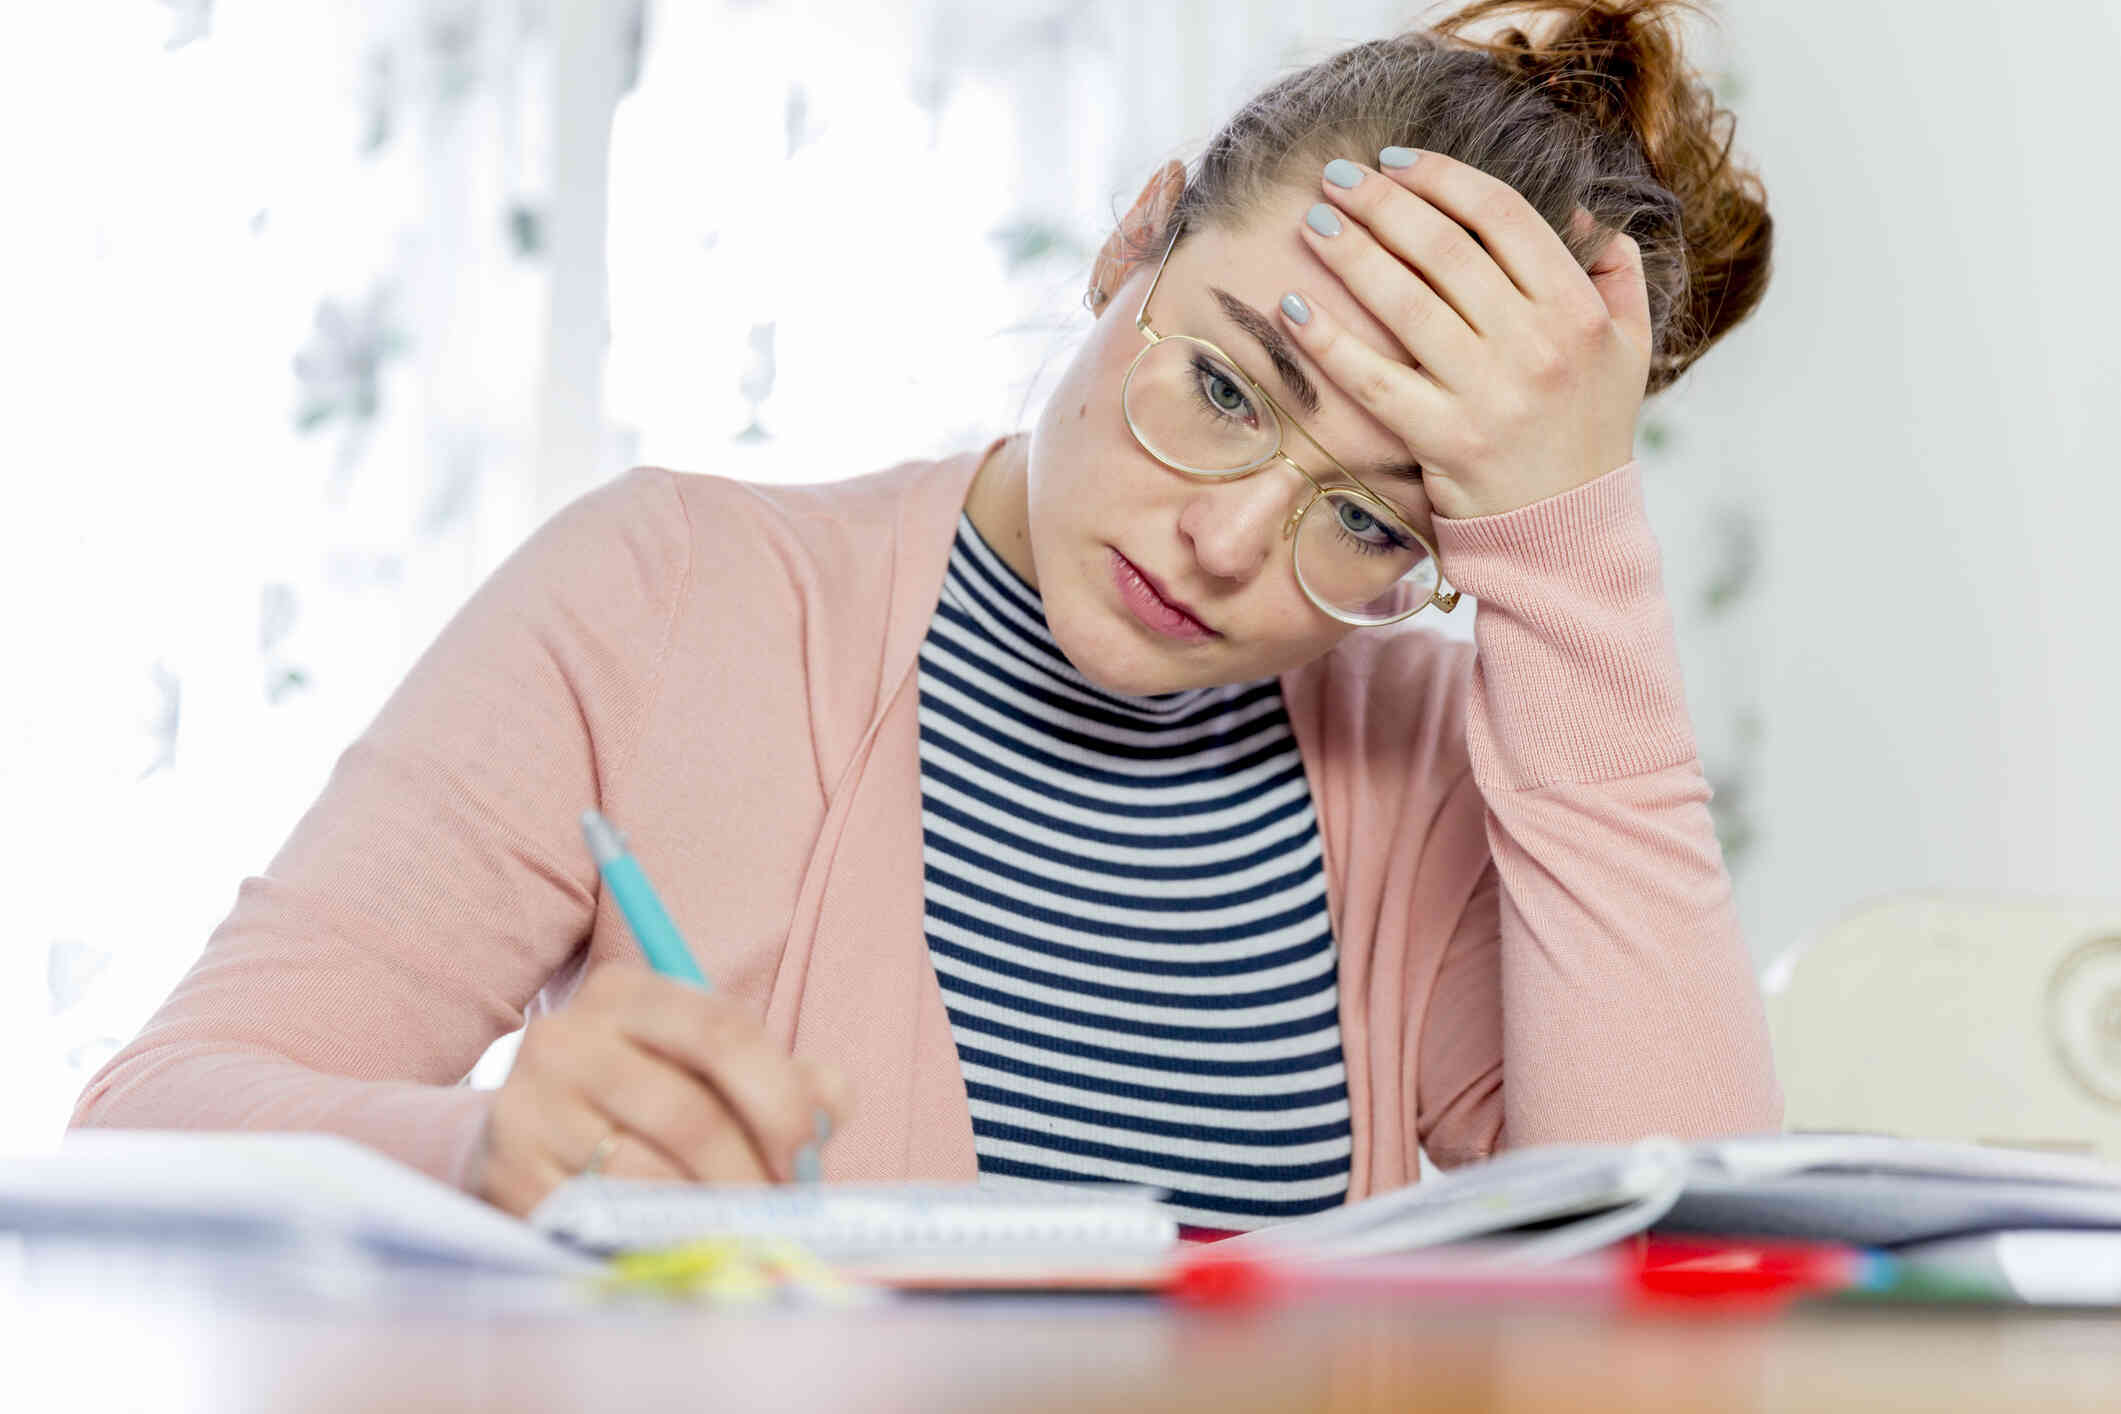 A woman in a pink blzer and glasses looks stressed as she writes on some papers while writting on some papers at a desk.